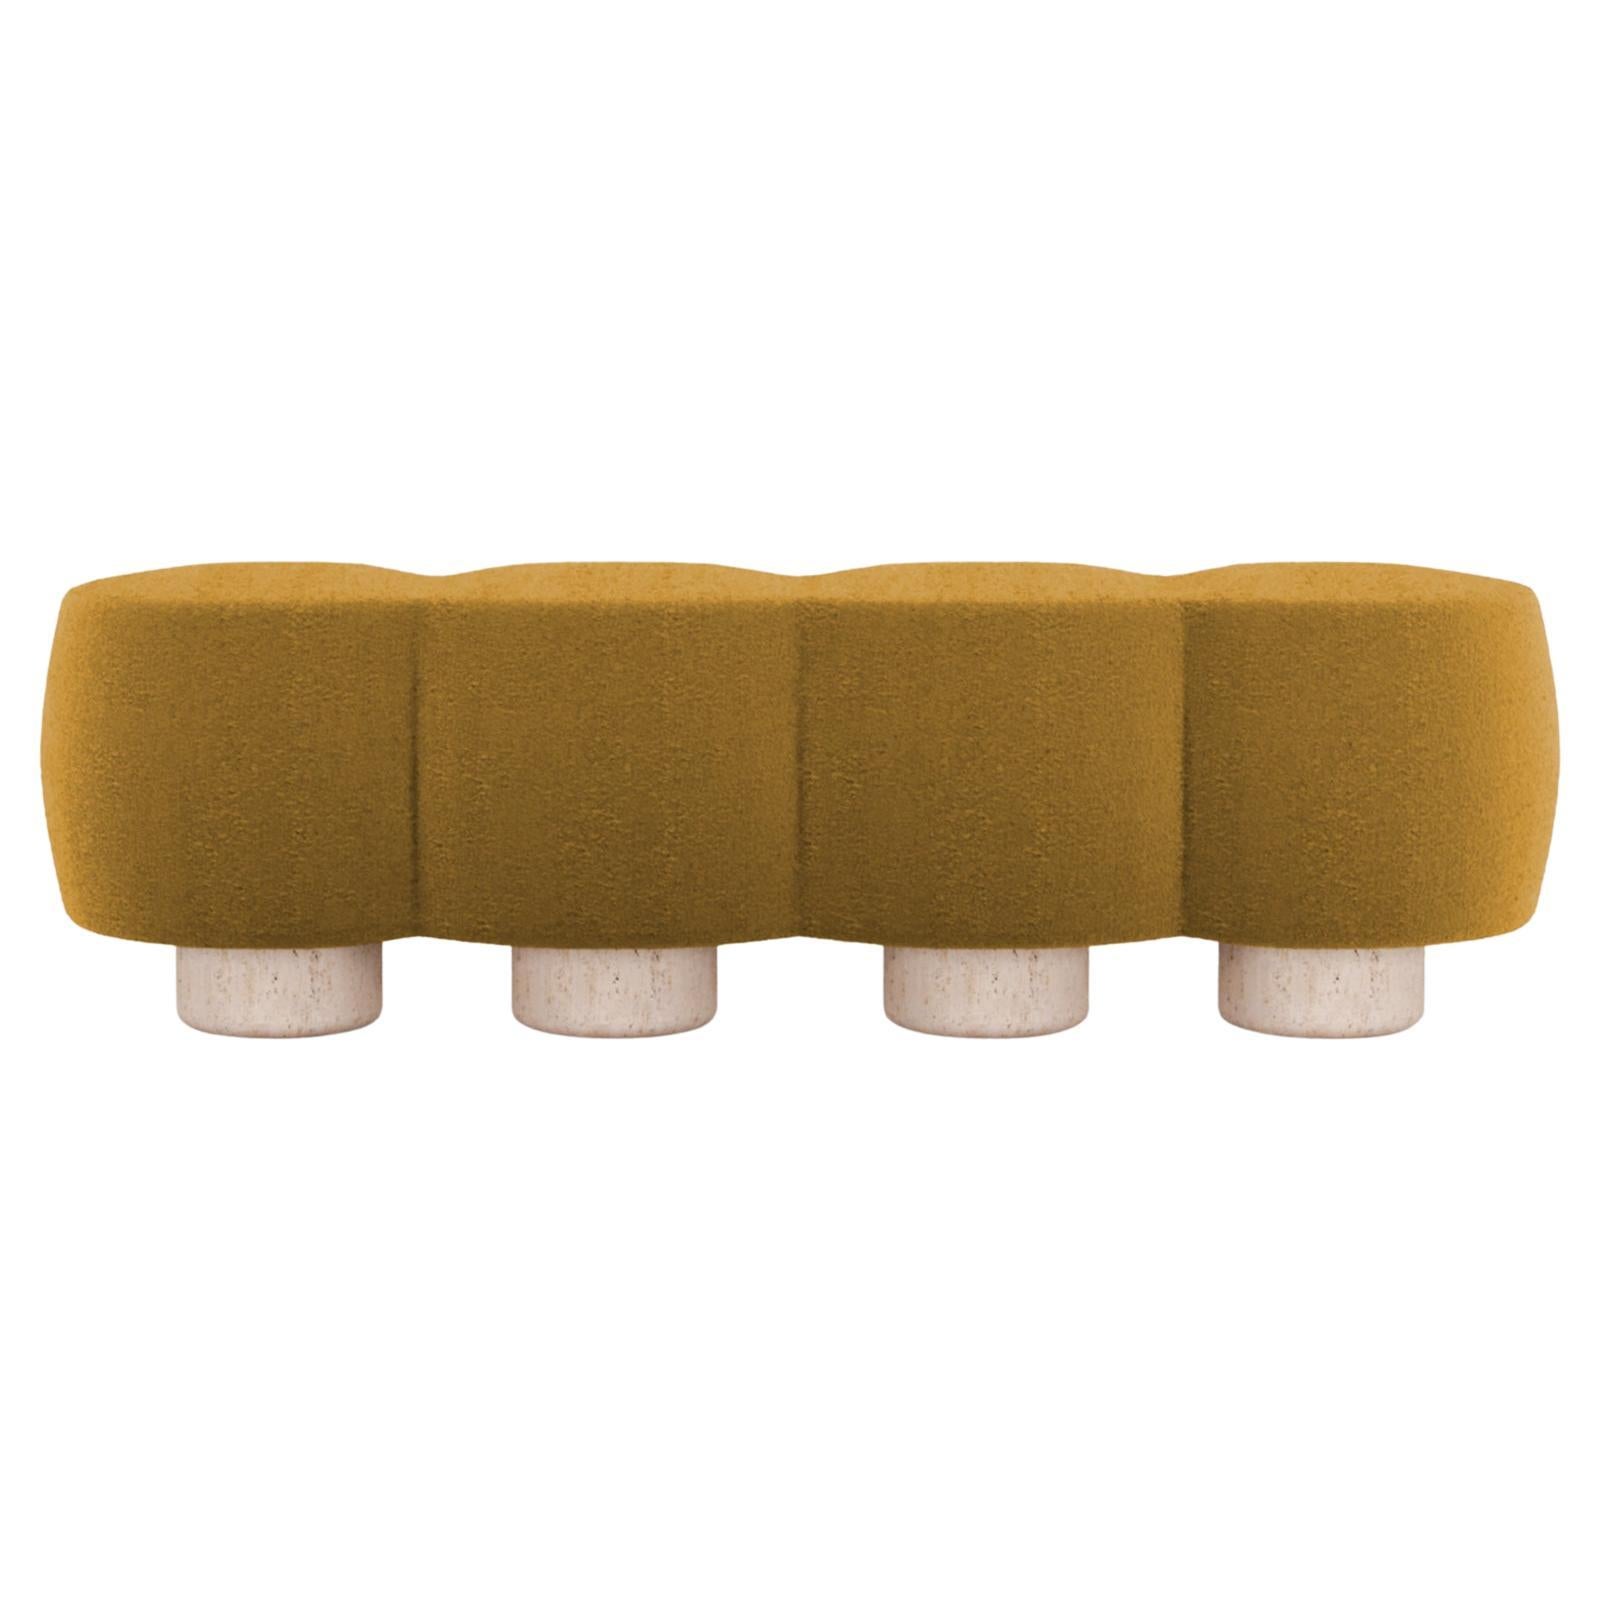 Contemporary Modern Hygge Cloud Bench in Boucle Mustard by Saccal Design House